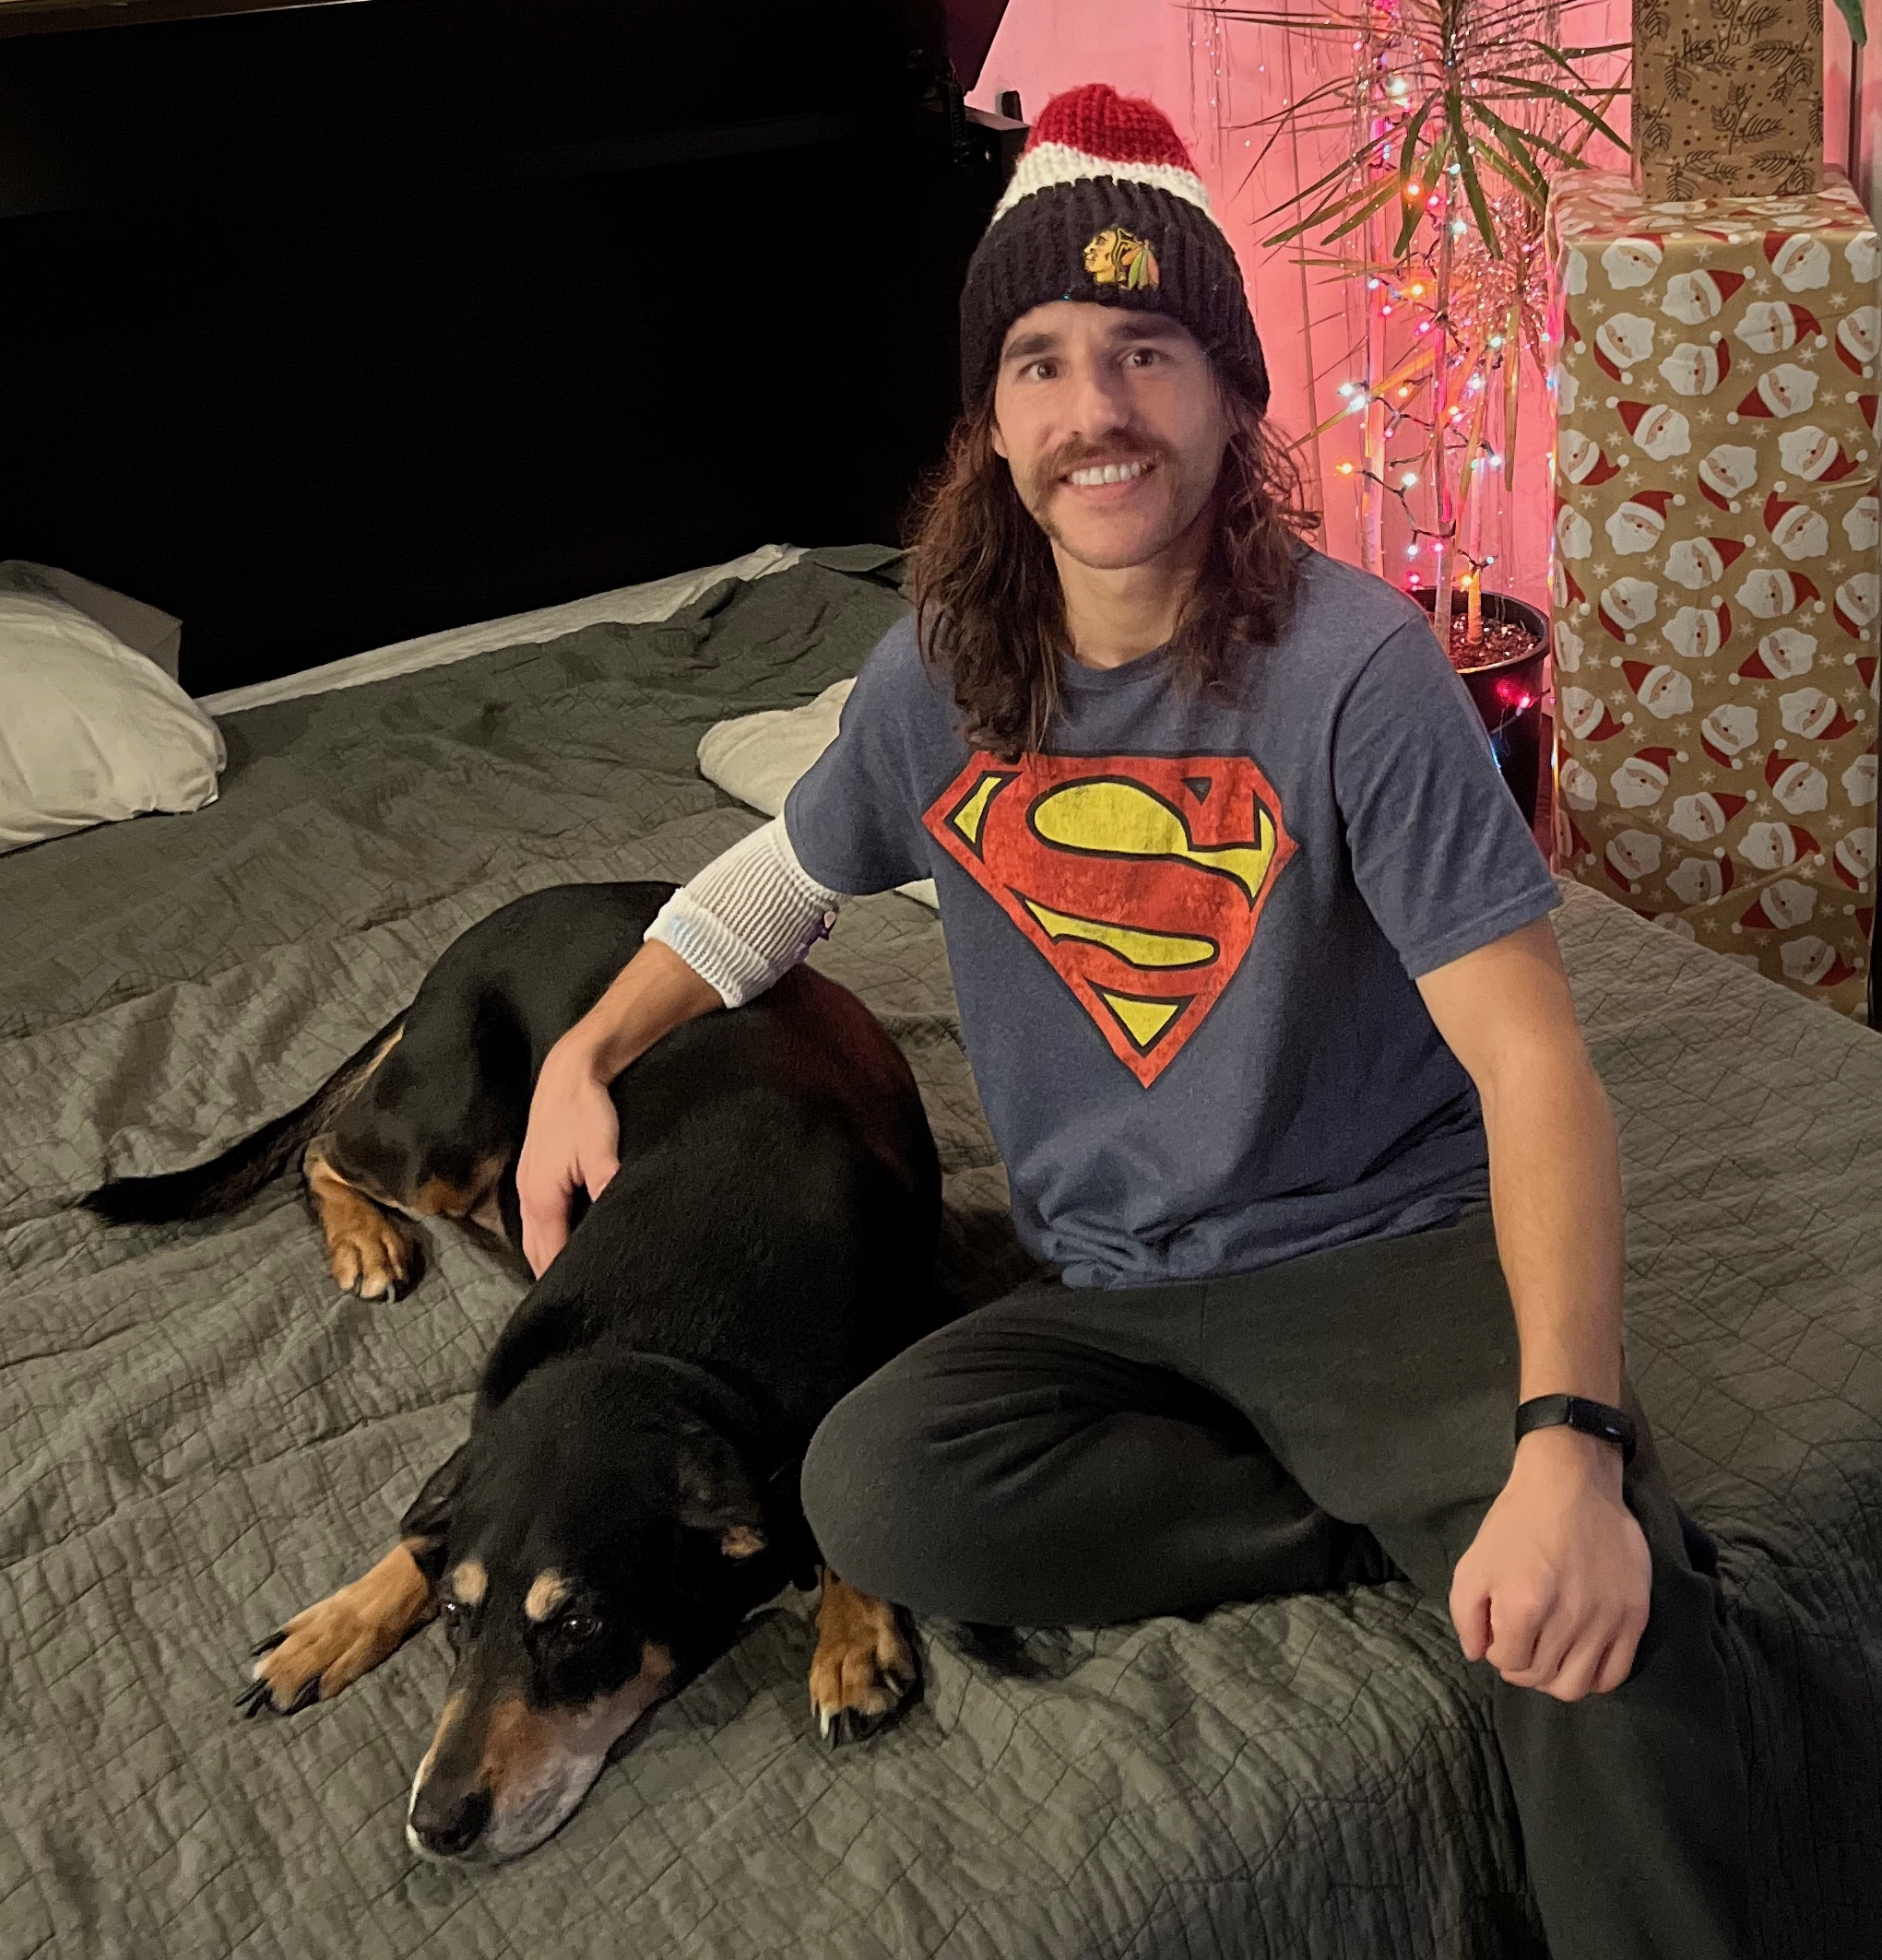 Andrew Flack, who has long wacy brown hair and a mustache wearing a superman tshirt and a red, white and blue beanie, is sitting on a bed next to his black and tan dog, Jaxson.